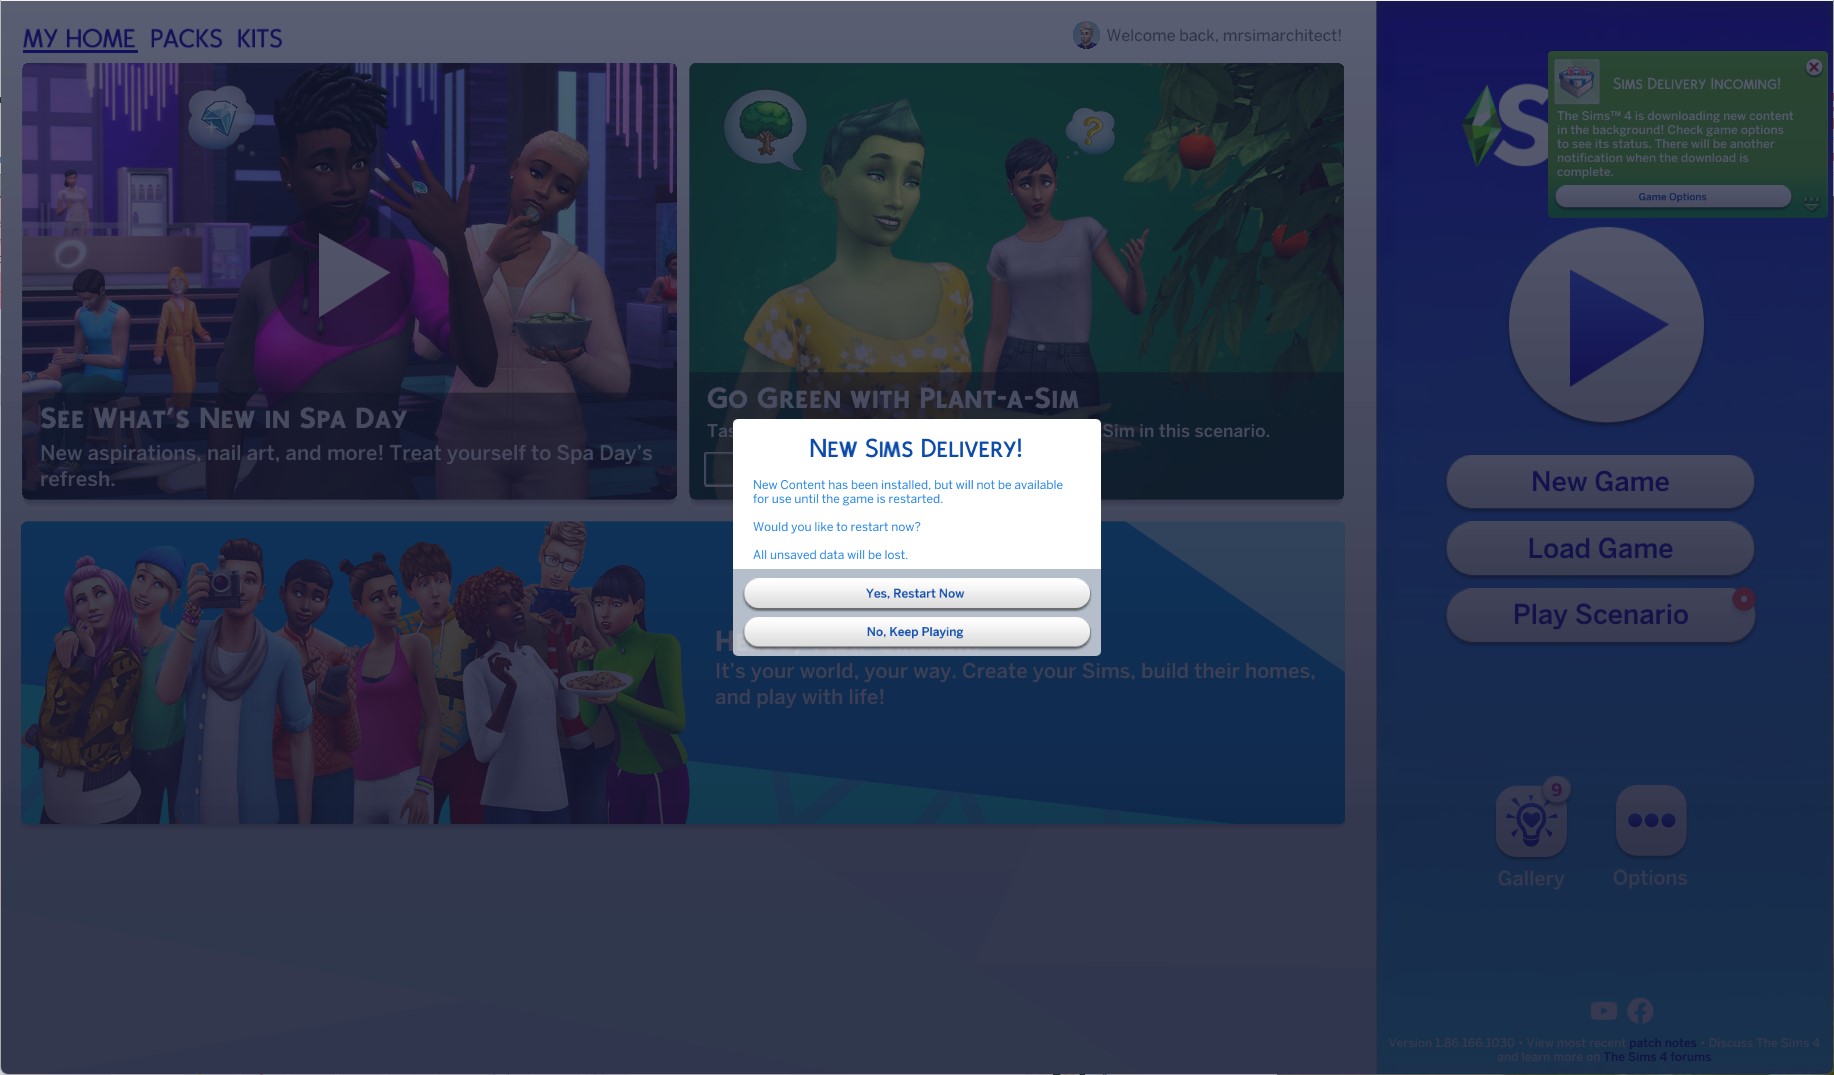 The Sims 4 Delivery Express 8.0.3 - June 24, 2022 - SDX 04 - The Sim Architect